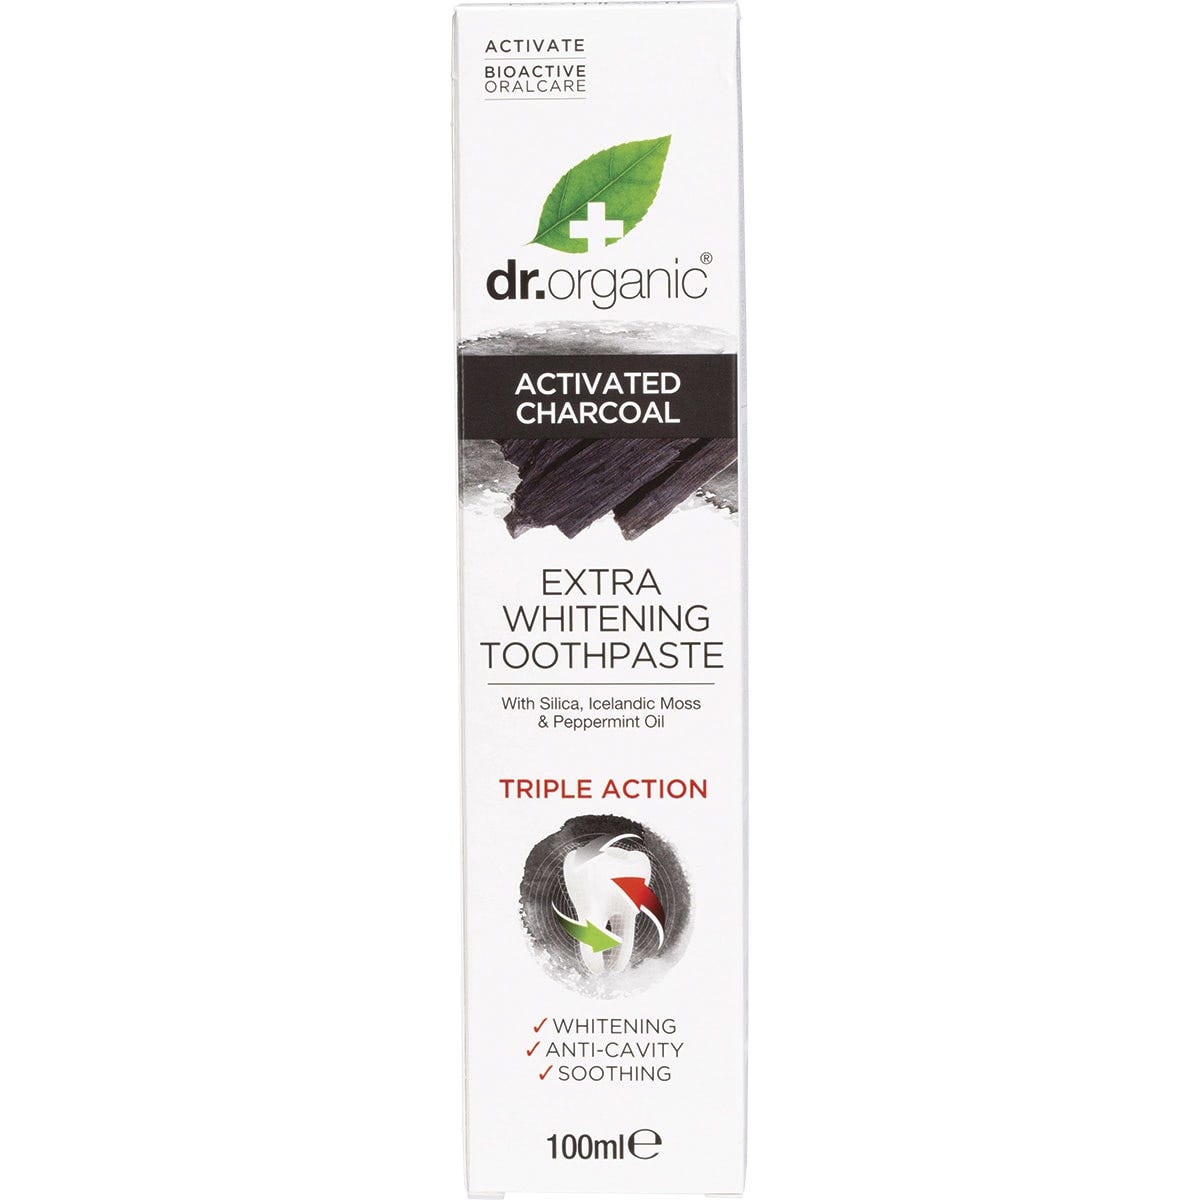 Dr Organic Toothpaste Whitening Activated Charcoal